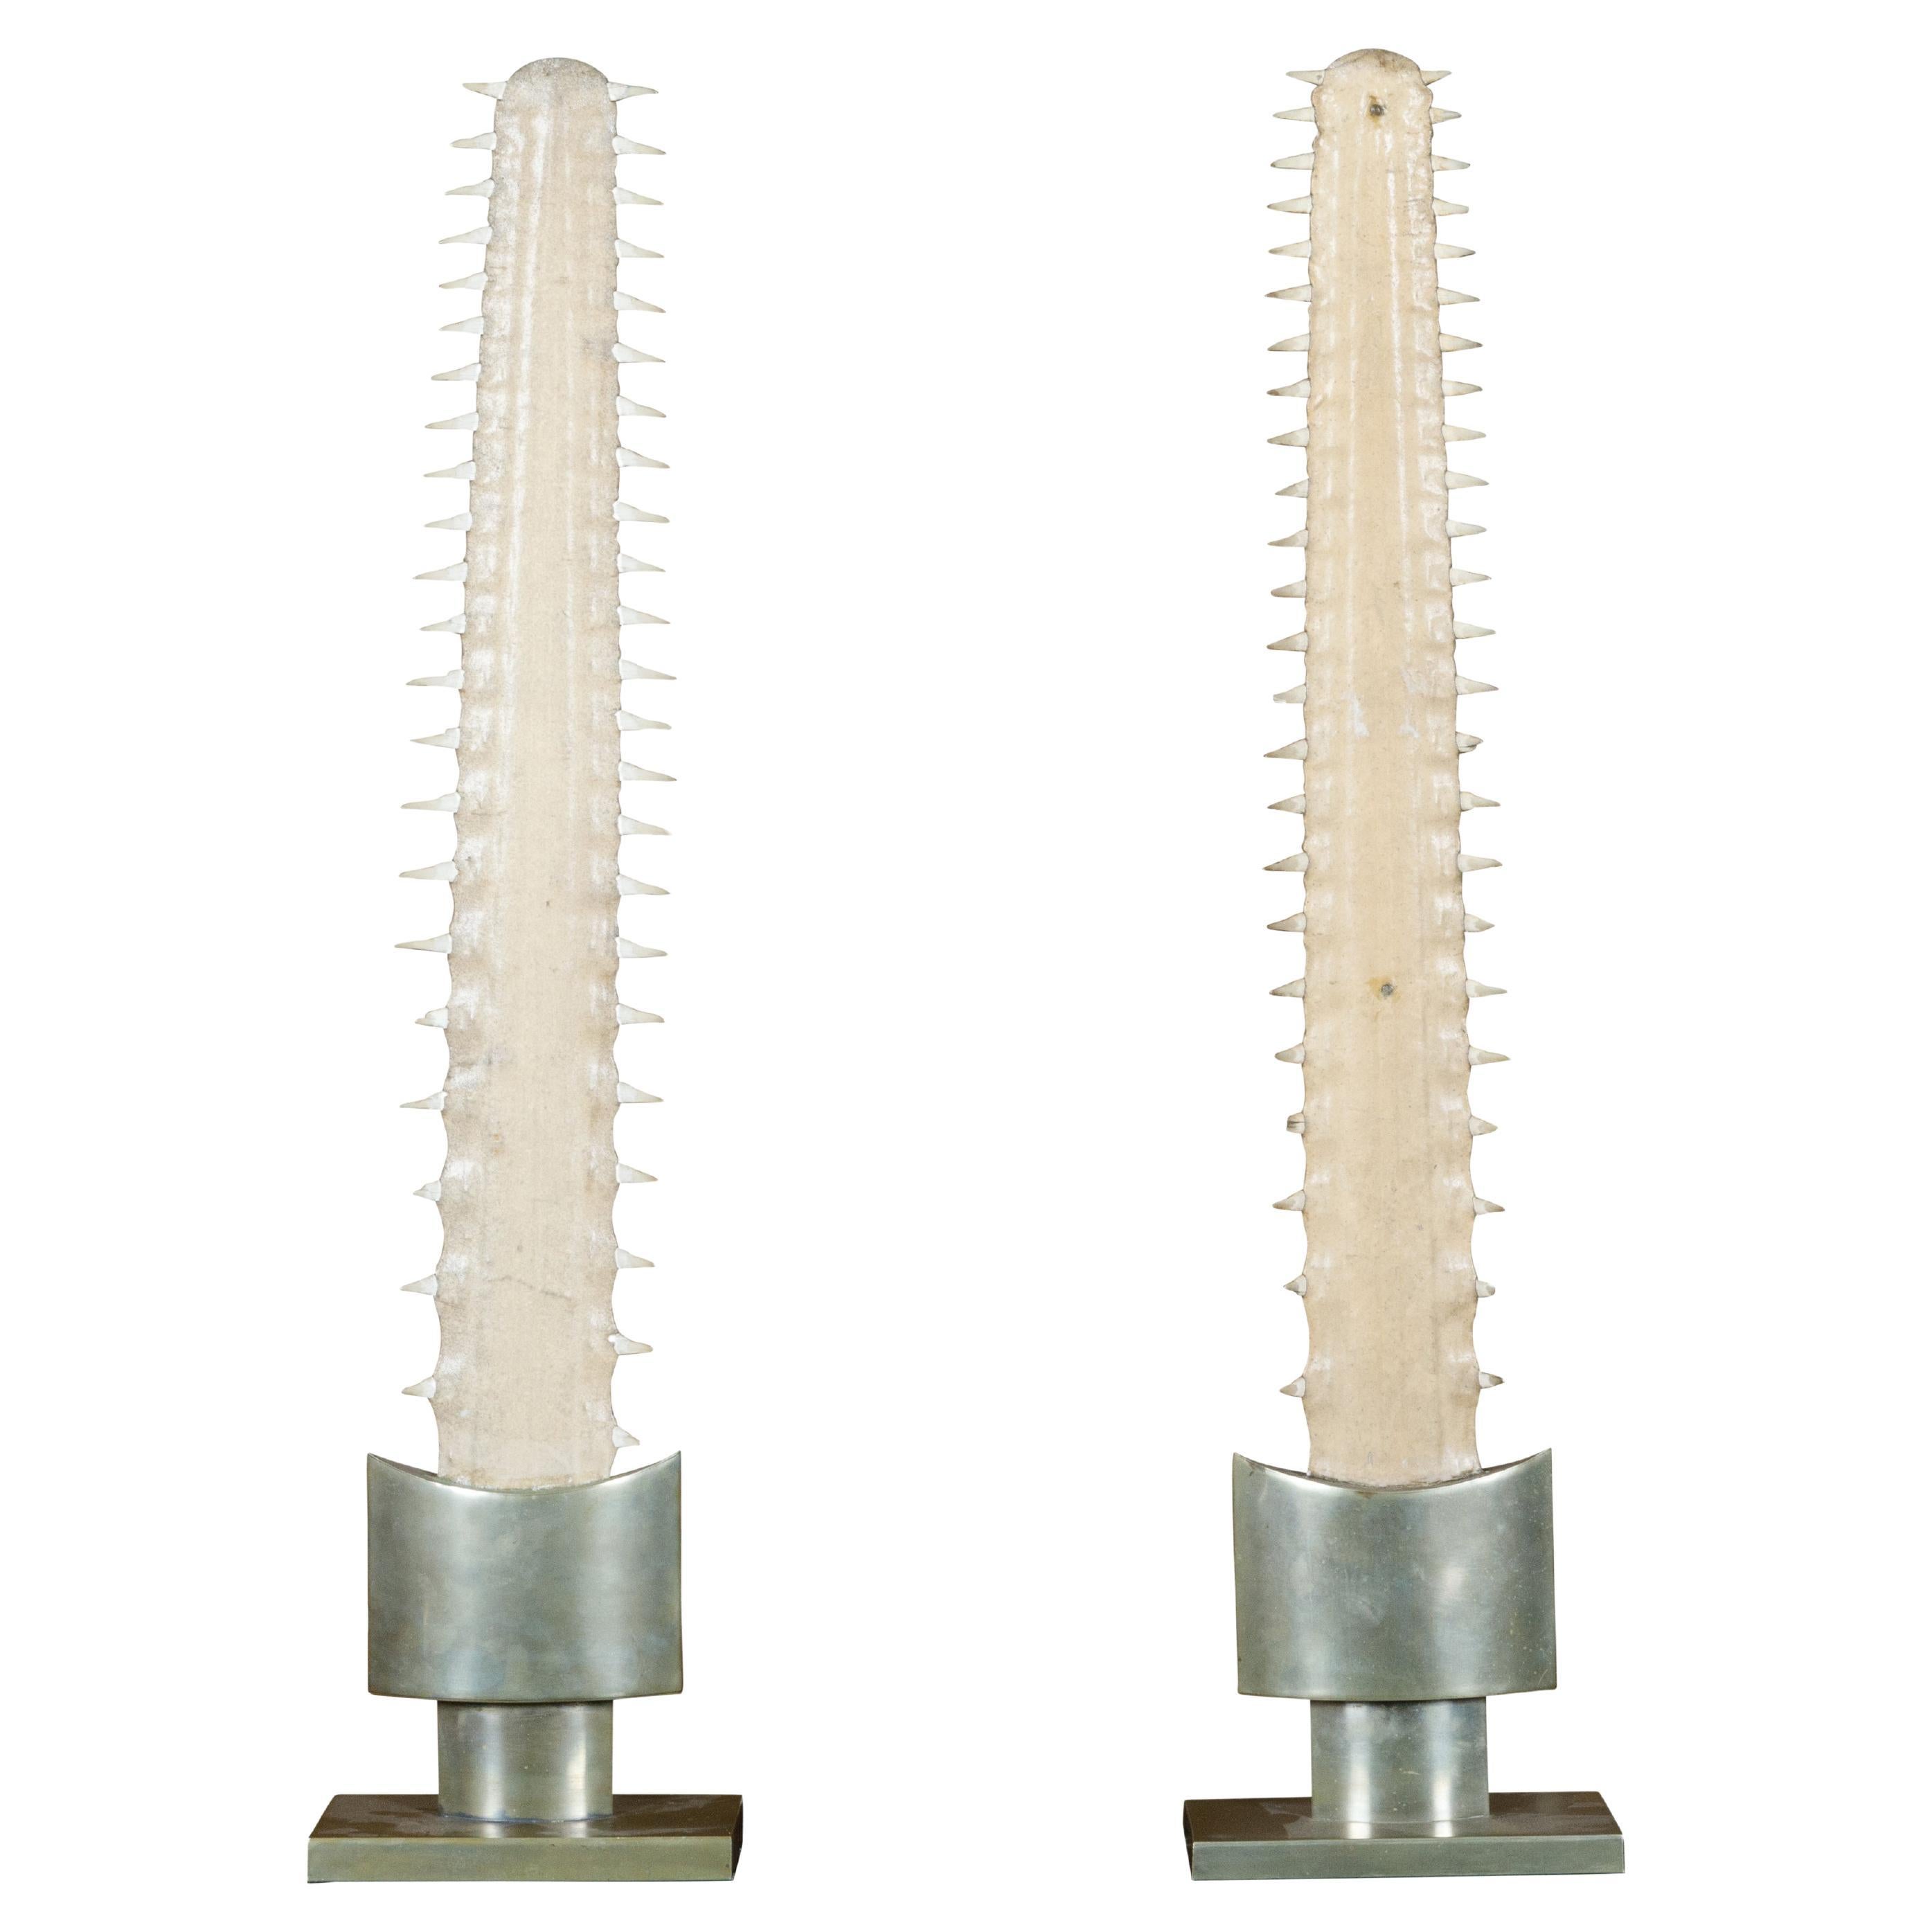 What is a sawfish rostrum?